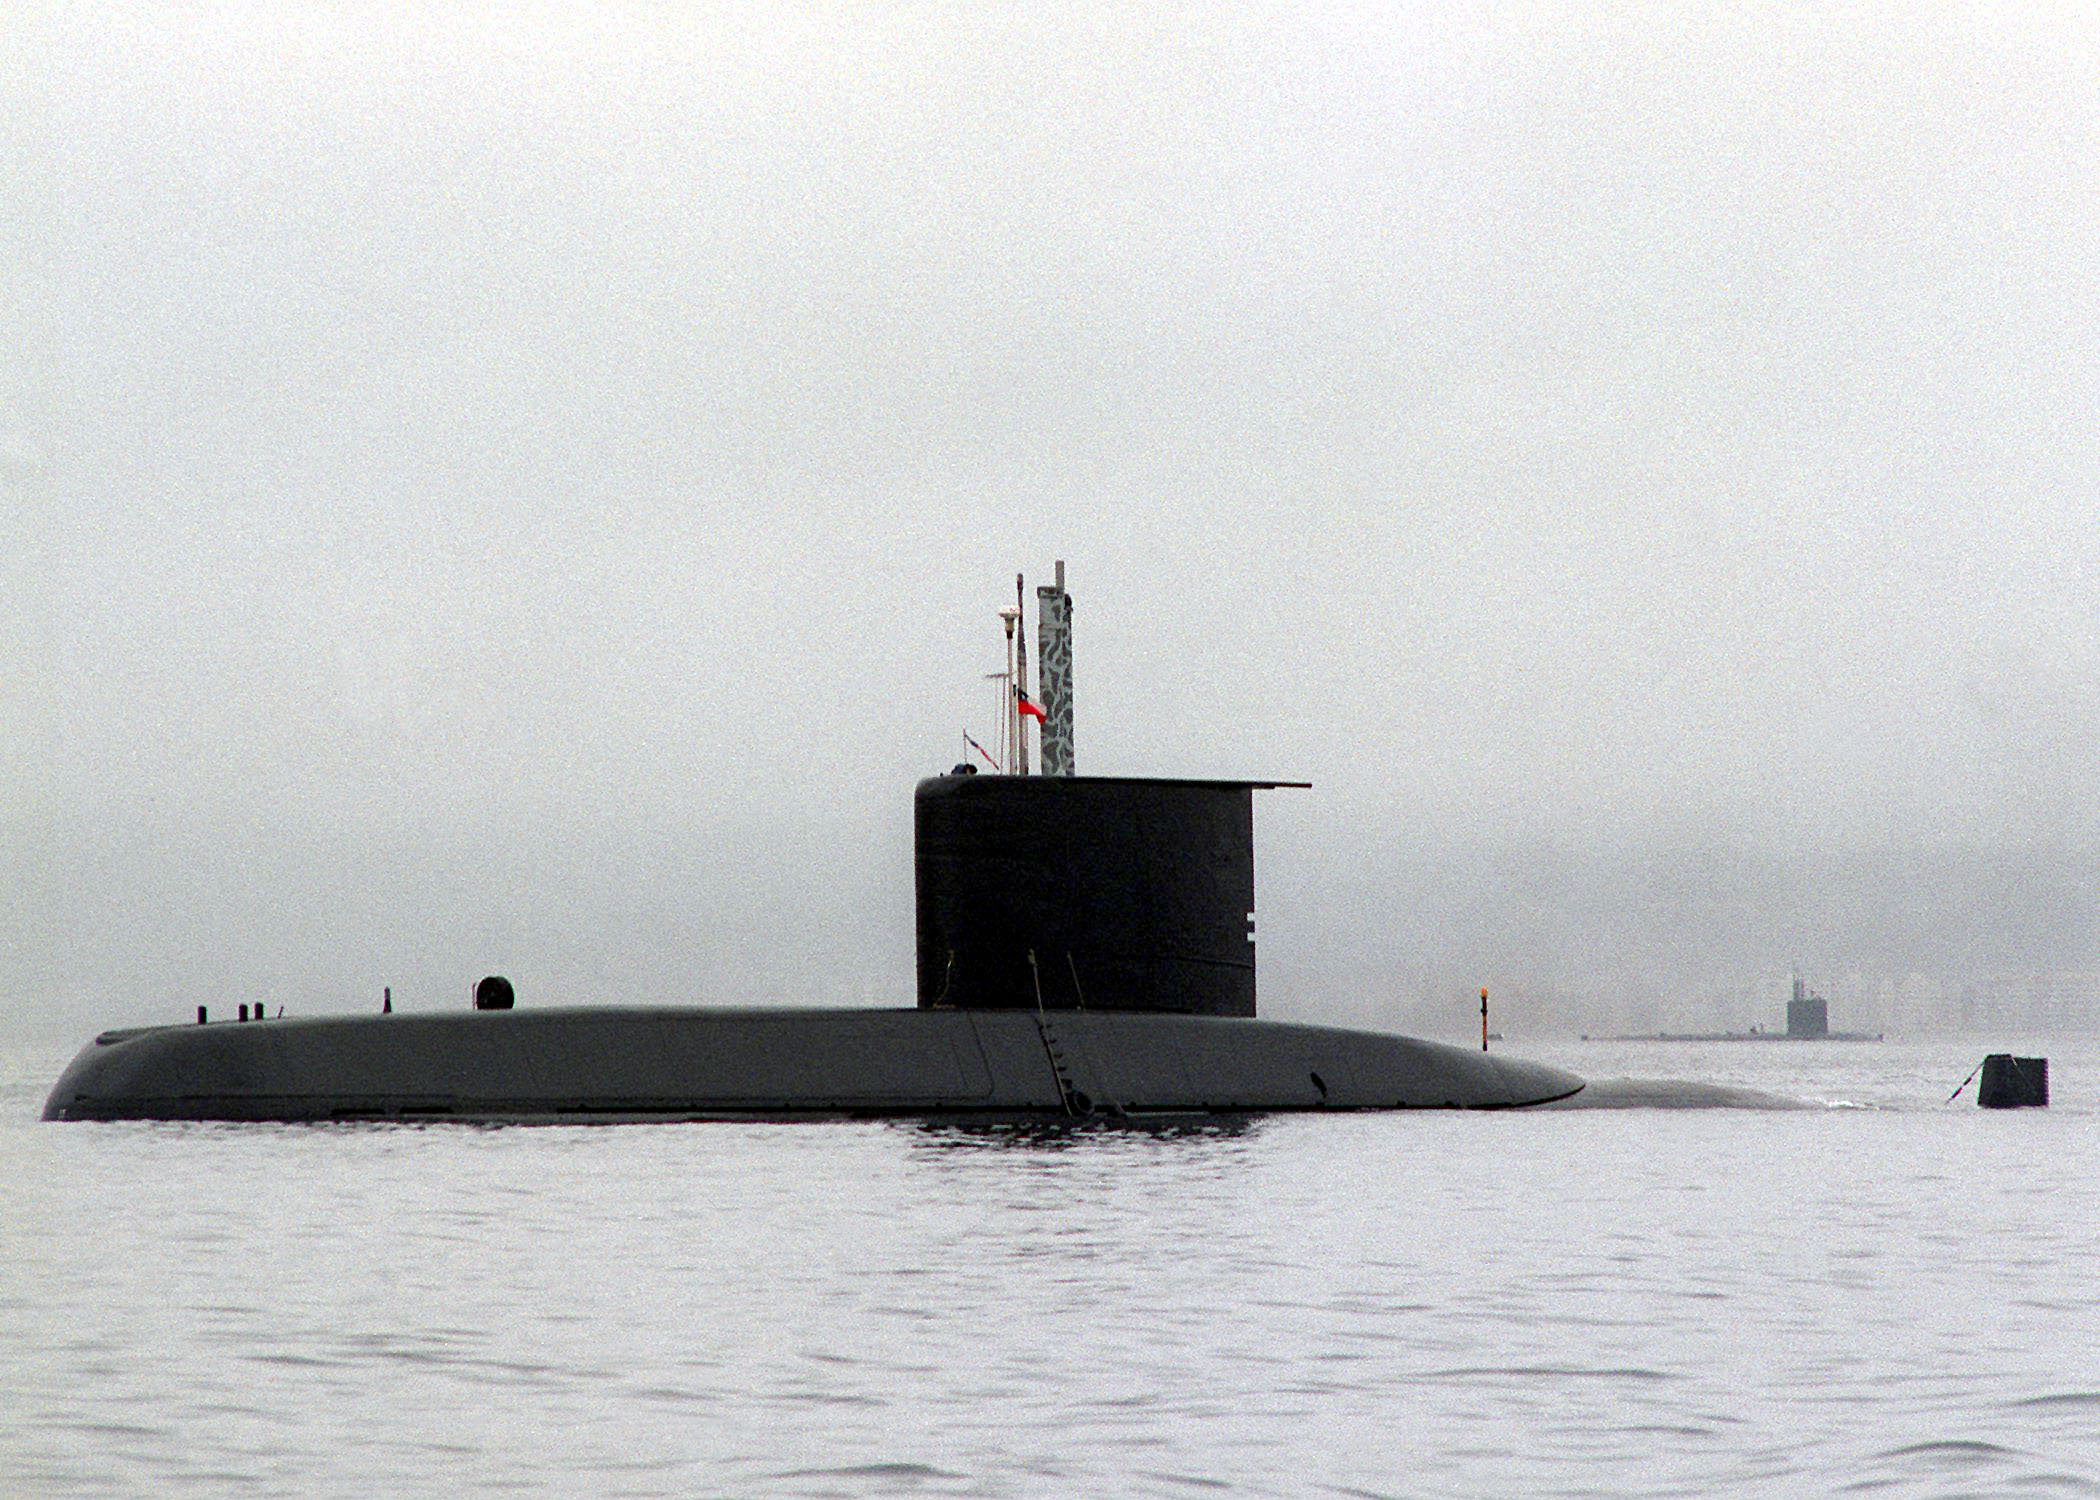 The Chilean Navy THOMSPON (Type 209) CLASS (TYPE 1300) (SSK) submarine anchored at Coquimbo, Chile. The U.S. Navy WARWHAL CLASS (SSN) nuclear-powered submarine USS Narwhal (SSN 671) is anchored in the background. Both submarines are participating in Phase 5 exercises of OPERATION UNITAS 37-96.